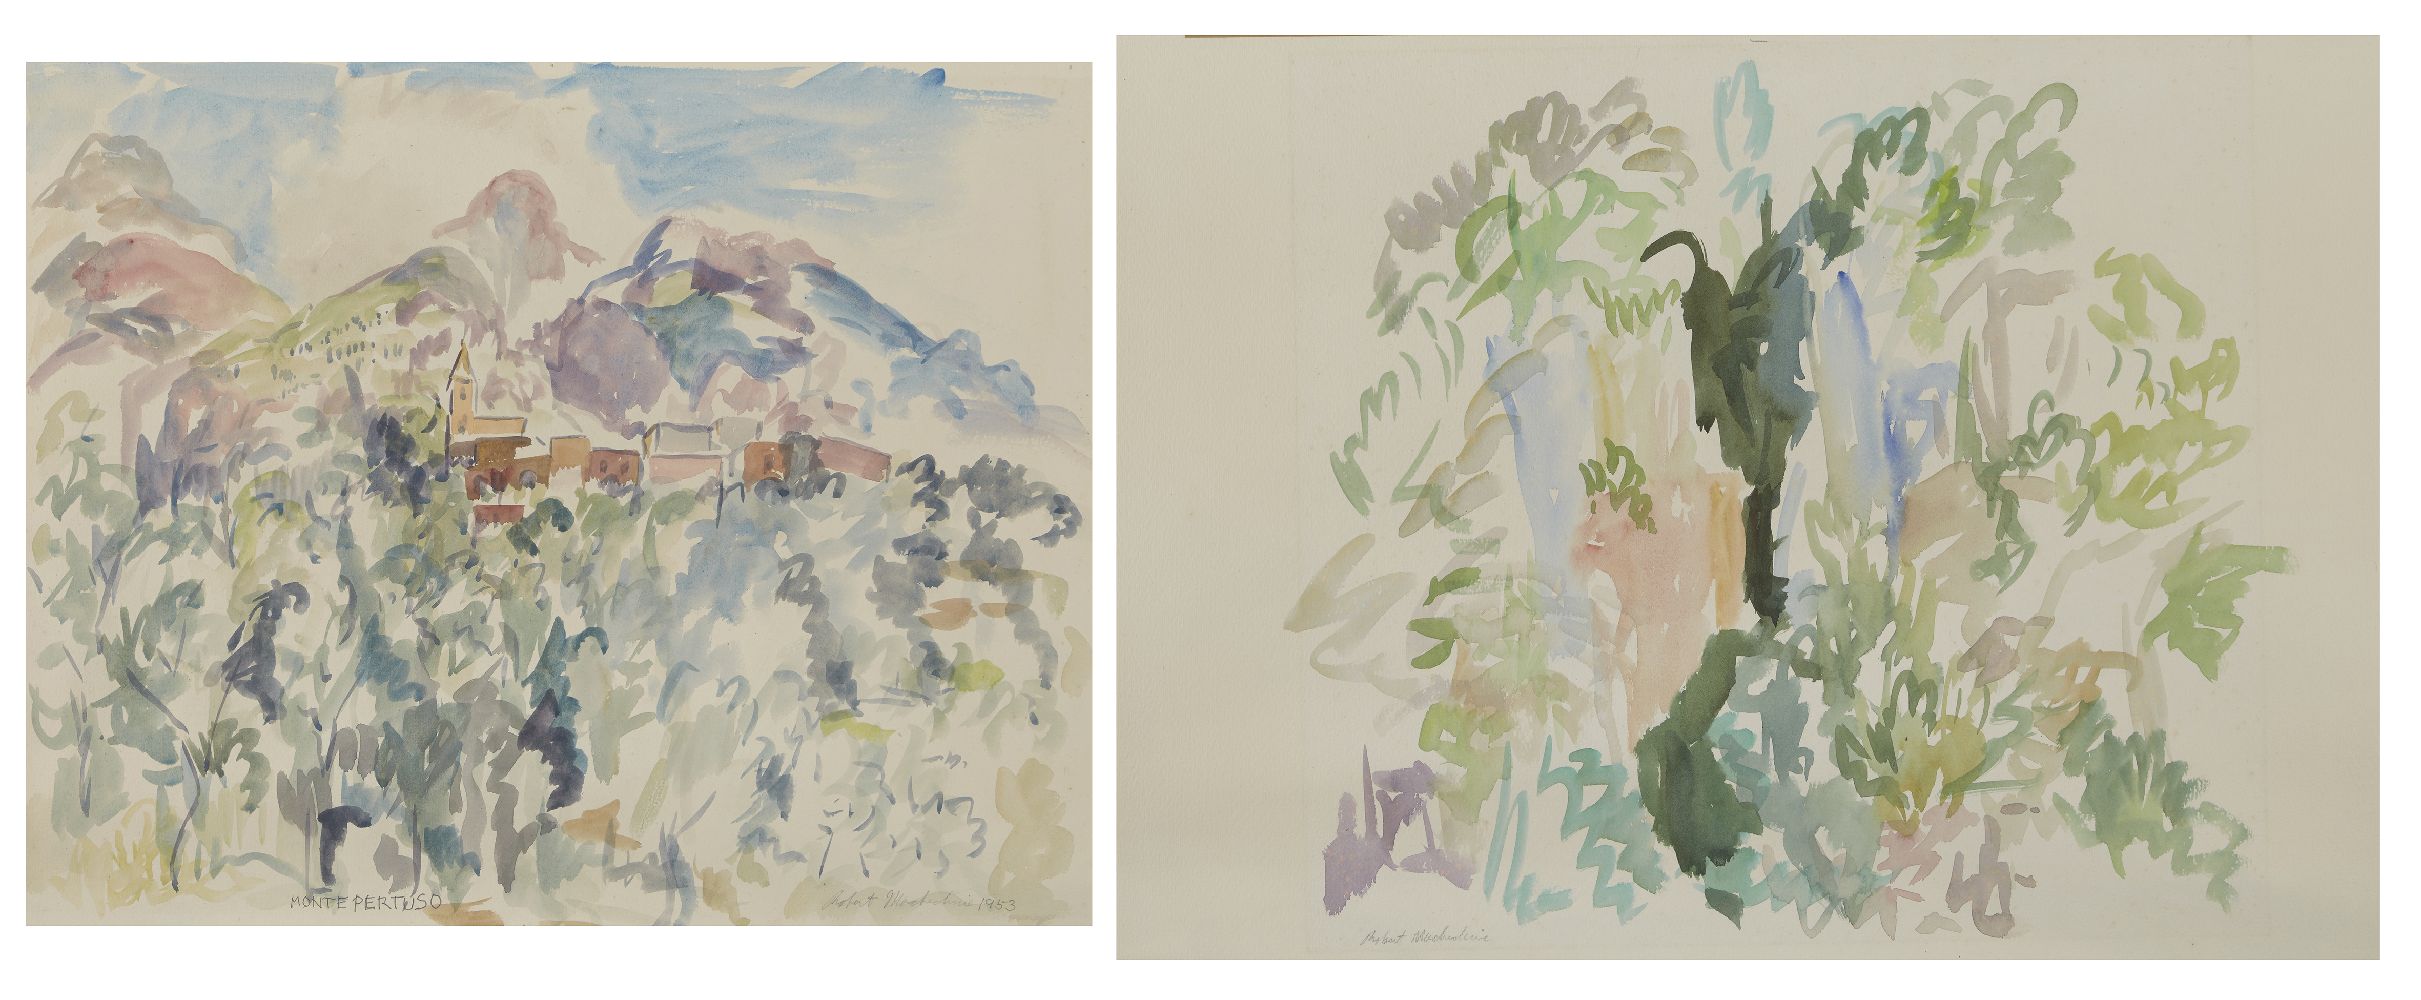 Robert Mackechnie, Scottish 1894–1975 - Monte Pertuso, 1953; watercolour on paper, signed and